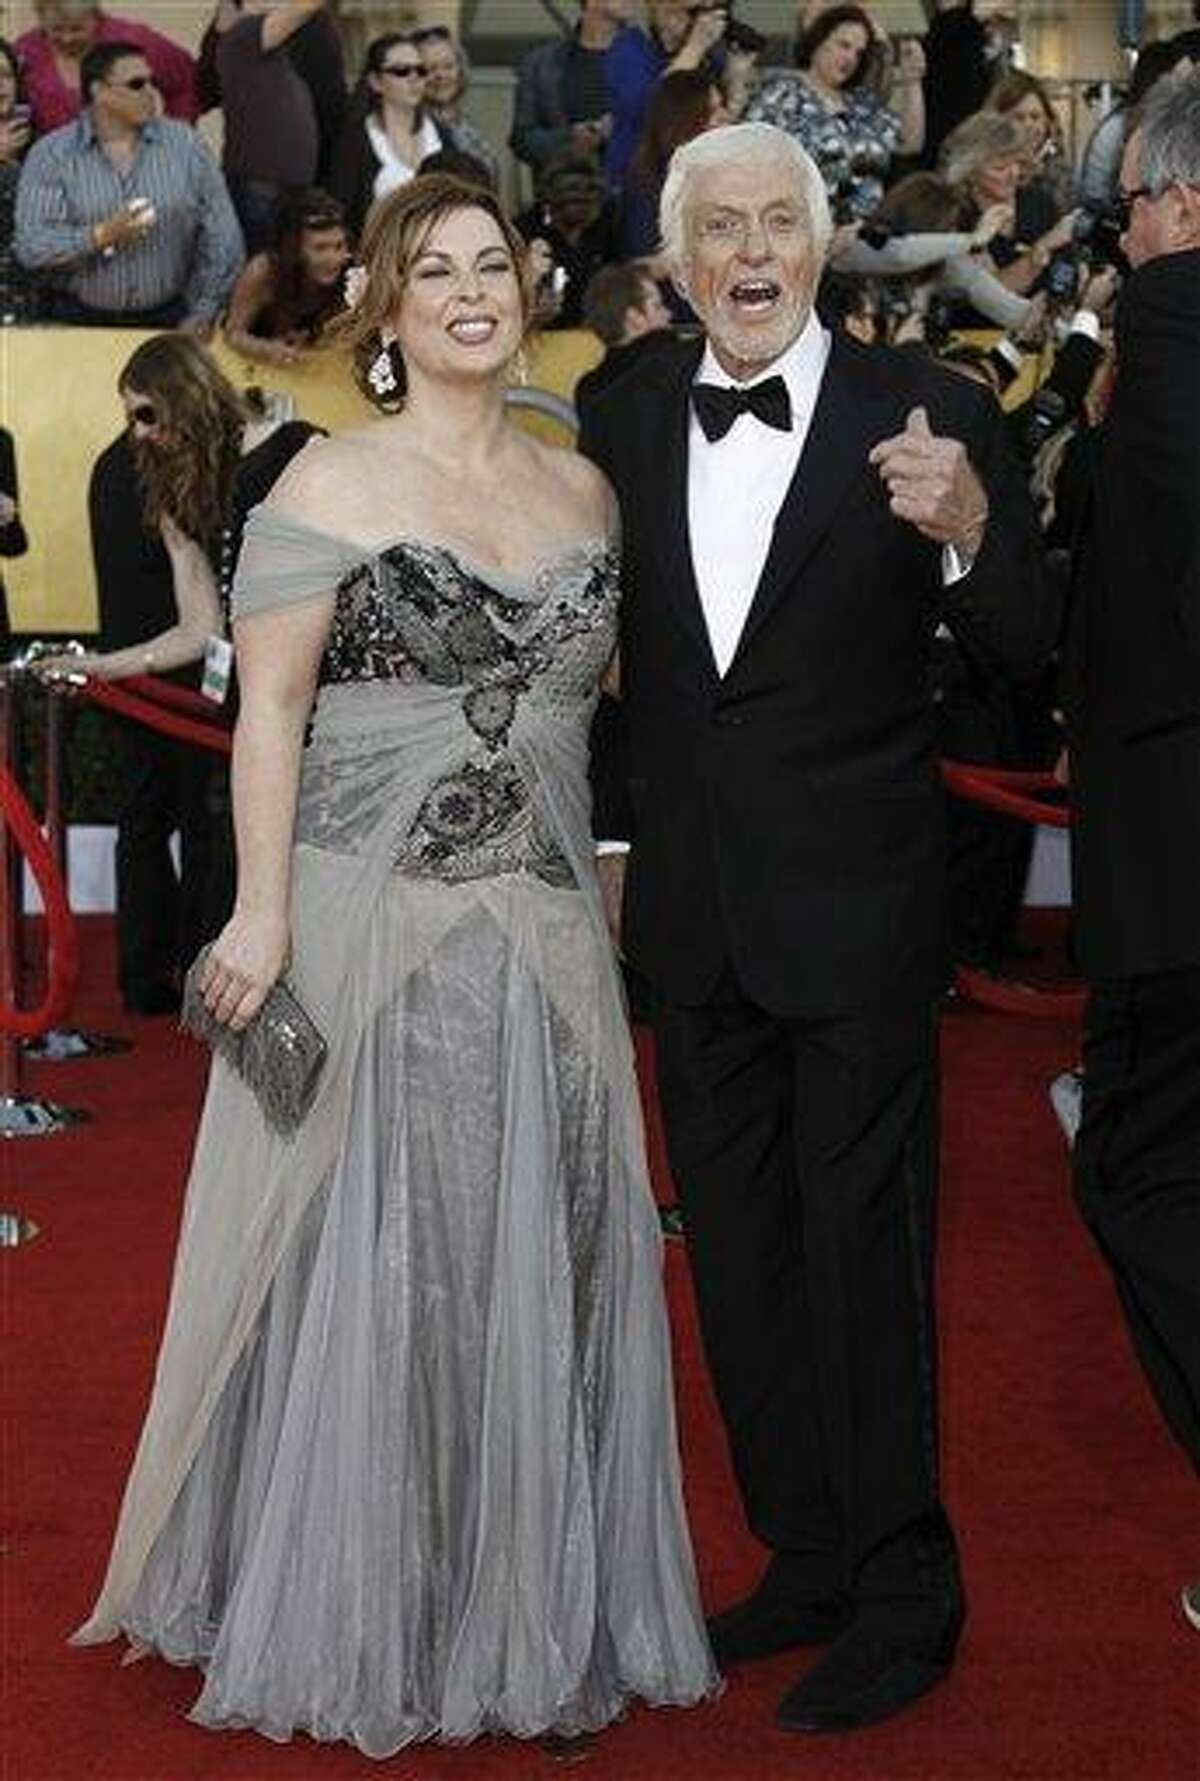 In this Jan. 29, 2012 file photo, actor Dick Van Dyke, right, and Arlene Silver arrive at the 18th Annual Screen Actors Guild Awards in Los Angeles. Van Dyke and Silver were married on Leap Day at a chapel in Malibu, according to his publicist, Bob Palmer. (AP Photo/Matt Sayles, file)